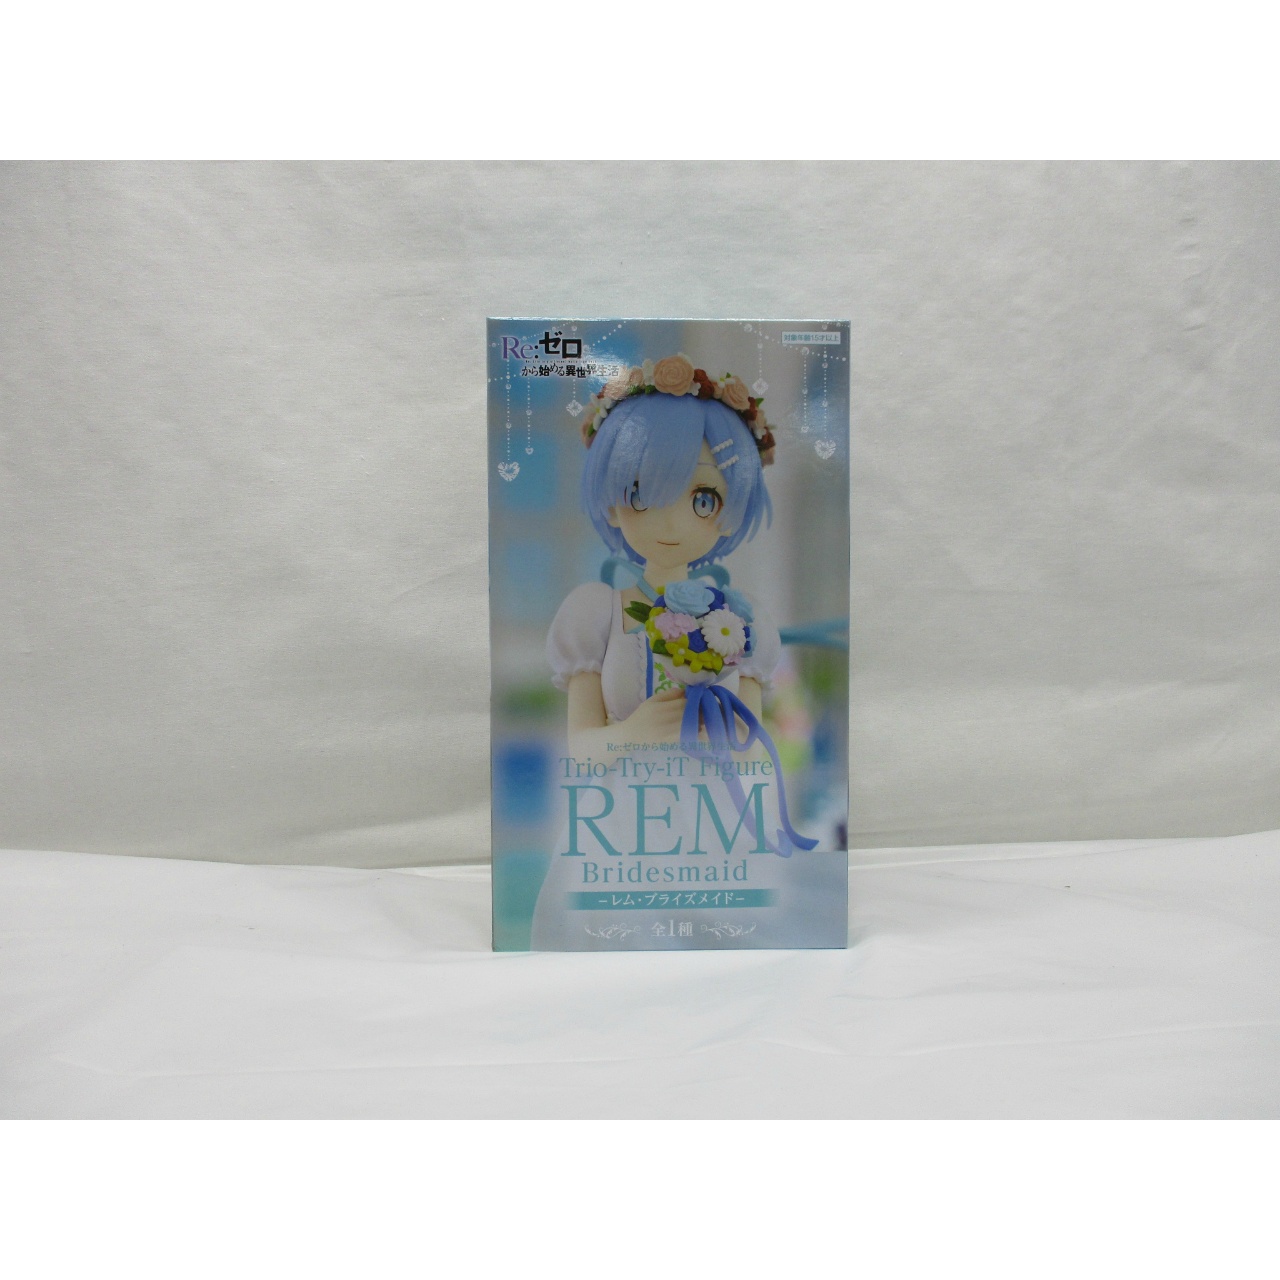 Re:ZERO -Starting Life in Another World- Trio-Try-iT Figure-Rem Bridesmaid-